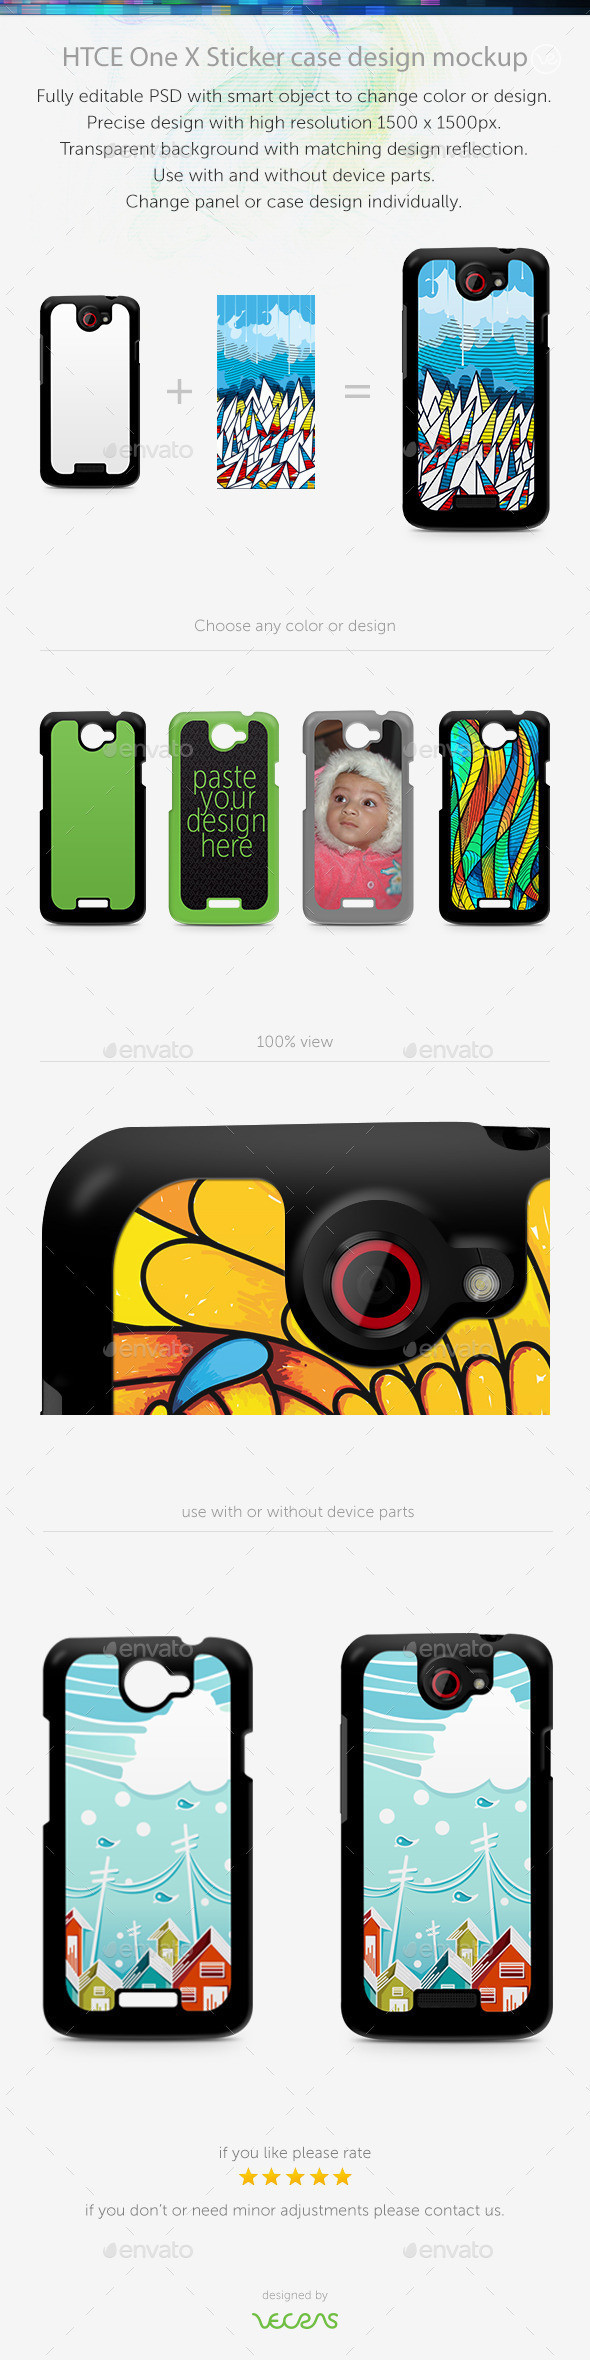 Preview htce one x stickercase mockup back